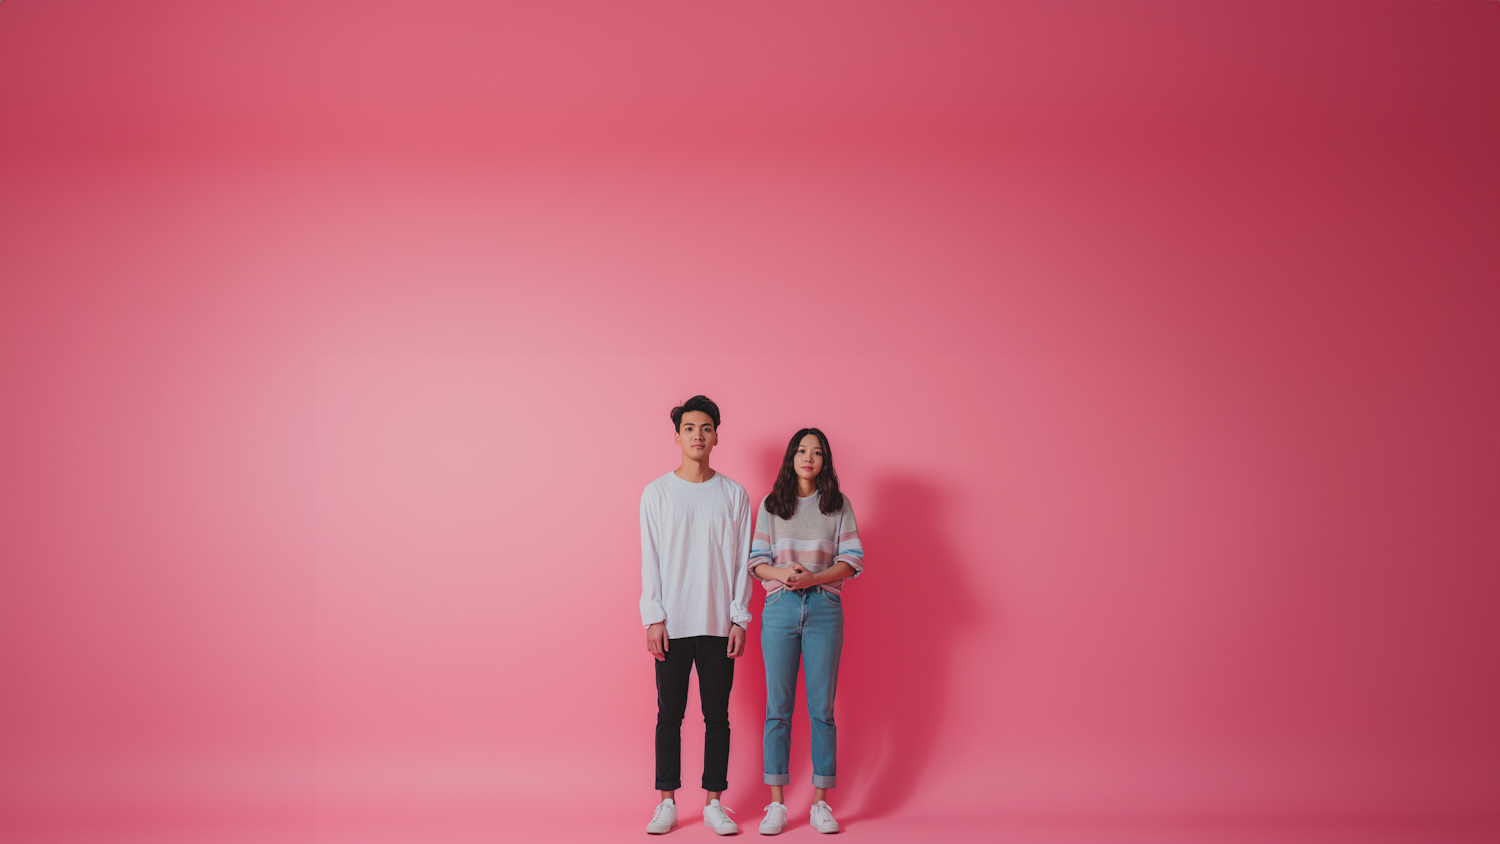 Casual Contemporary Portrait of Two Young Adults